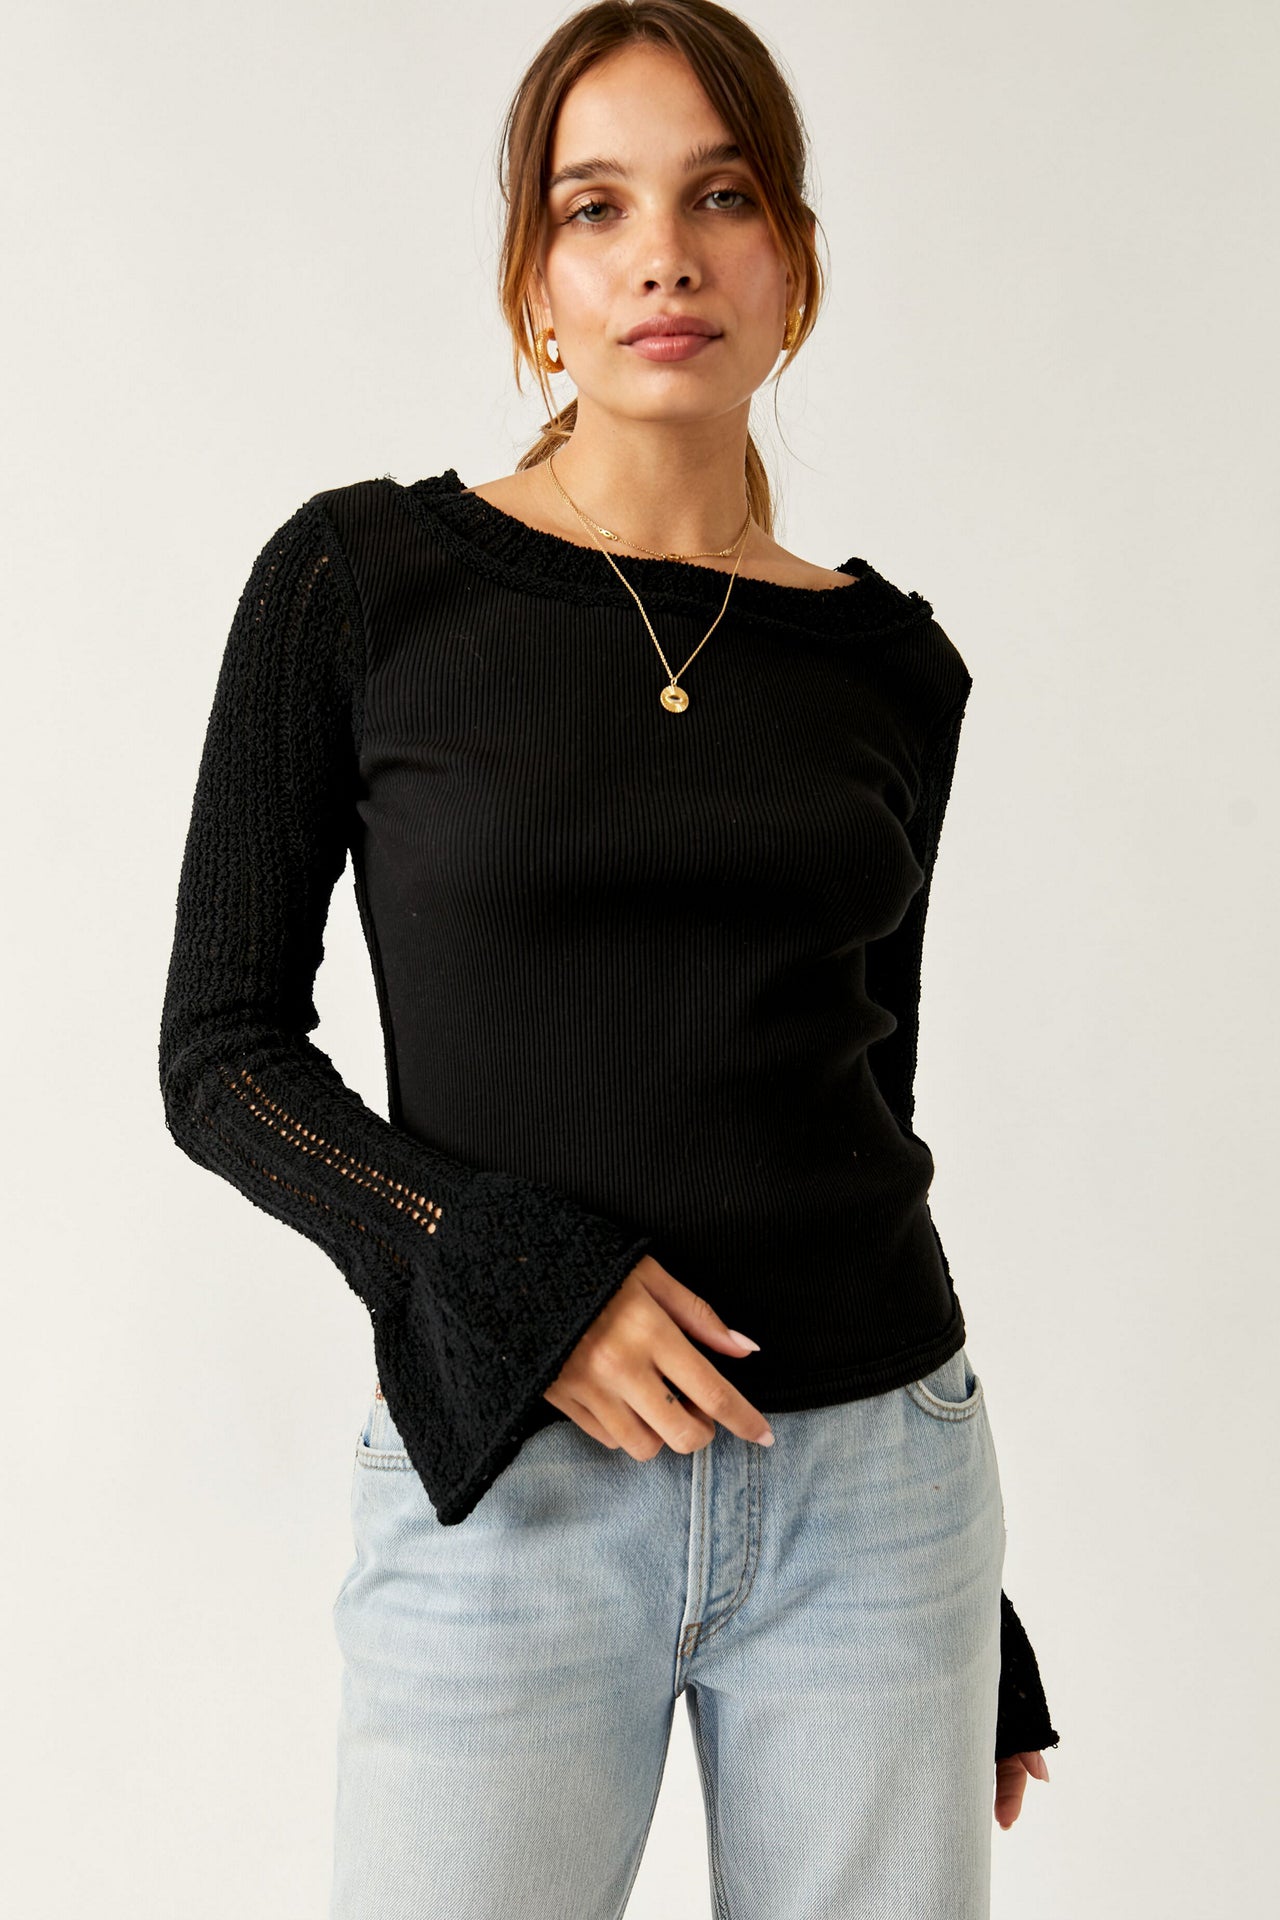 Cuffing Season Long Sleeve Top Black, Long Blouse by Free People | LIT Boutique